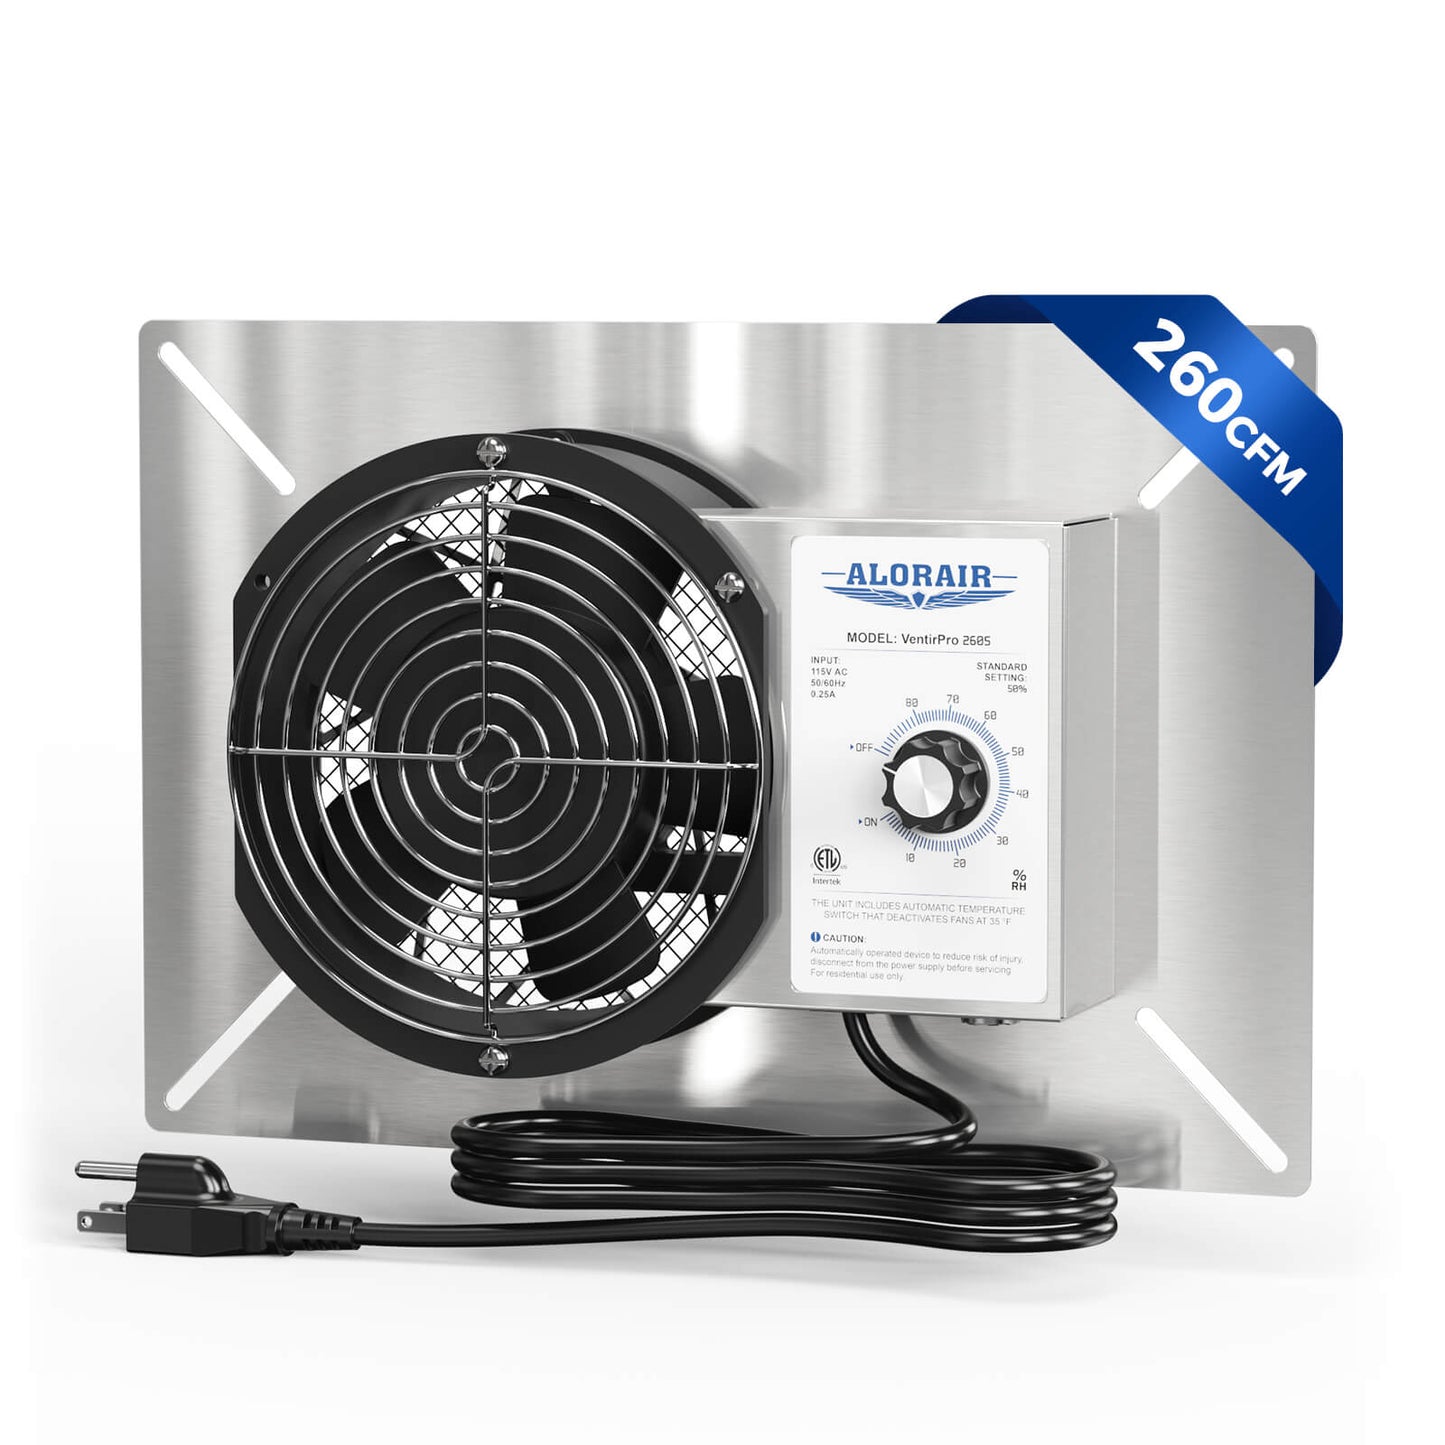 AlorAir Stainless Steel Crawl Space Ventilation Fan - 260 CFM Air Vent Fan with Humidistat Dehumidistat, IP55 Rated Exhaust for Foundation Basements, Attics, and Garages AlorAir